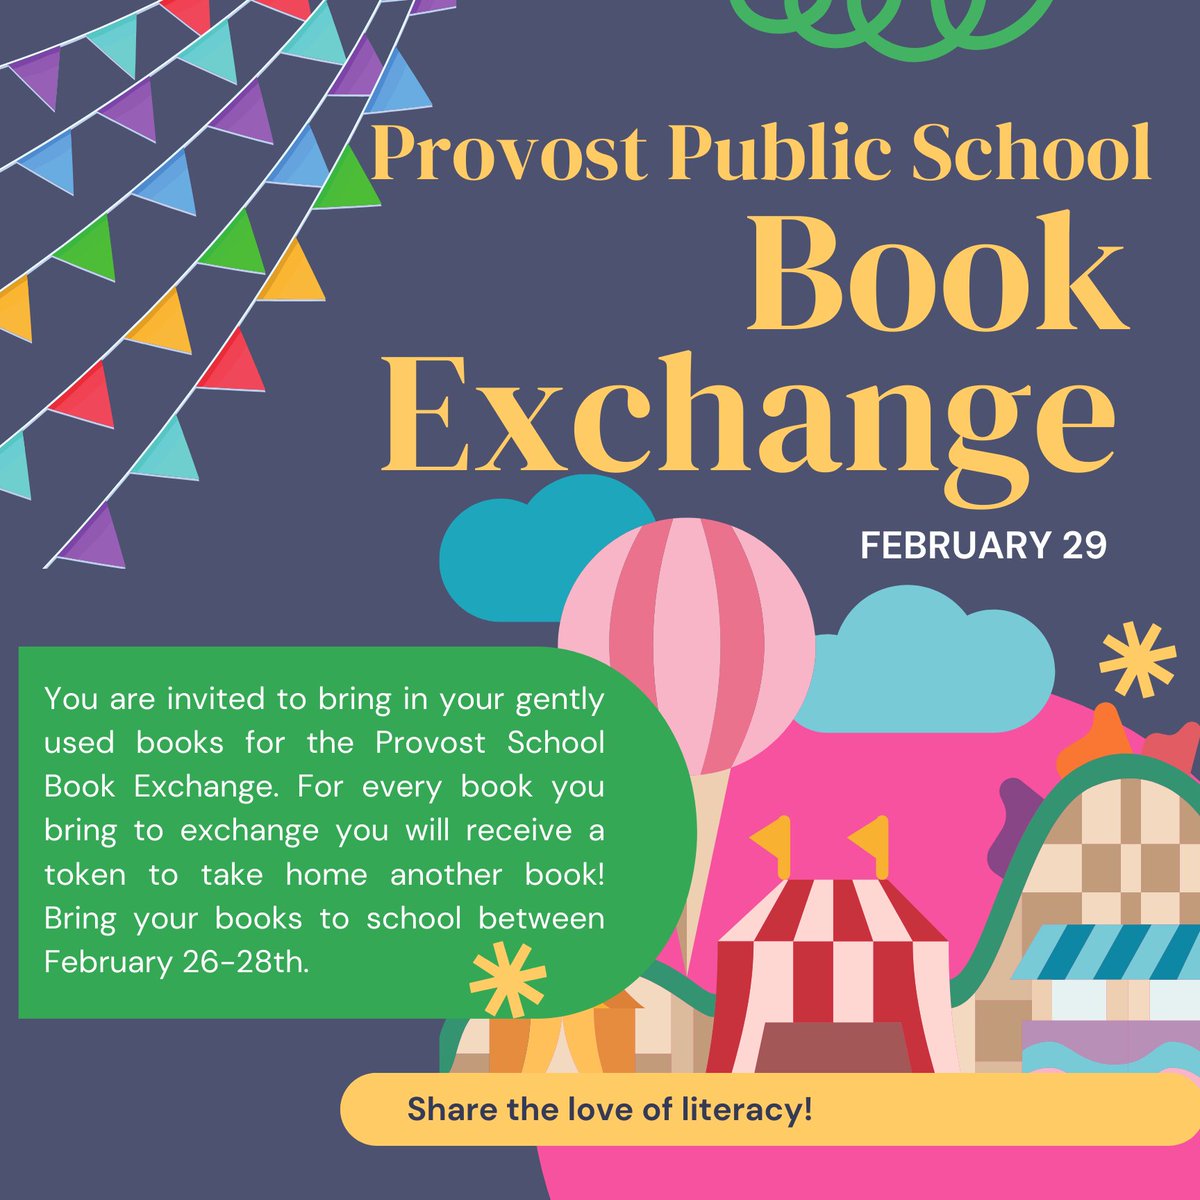 Provost Public School Book Exchange! Bring your gently used books between Feb 26 to 28th. #bookexchange #literacy #reading #PPS #btps28